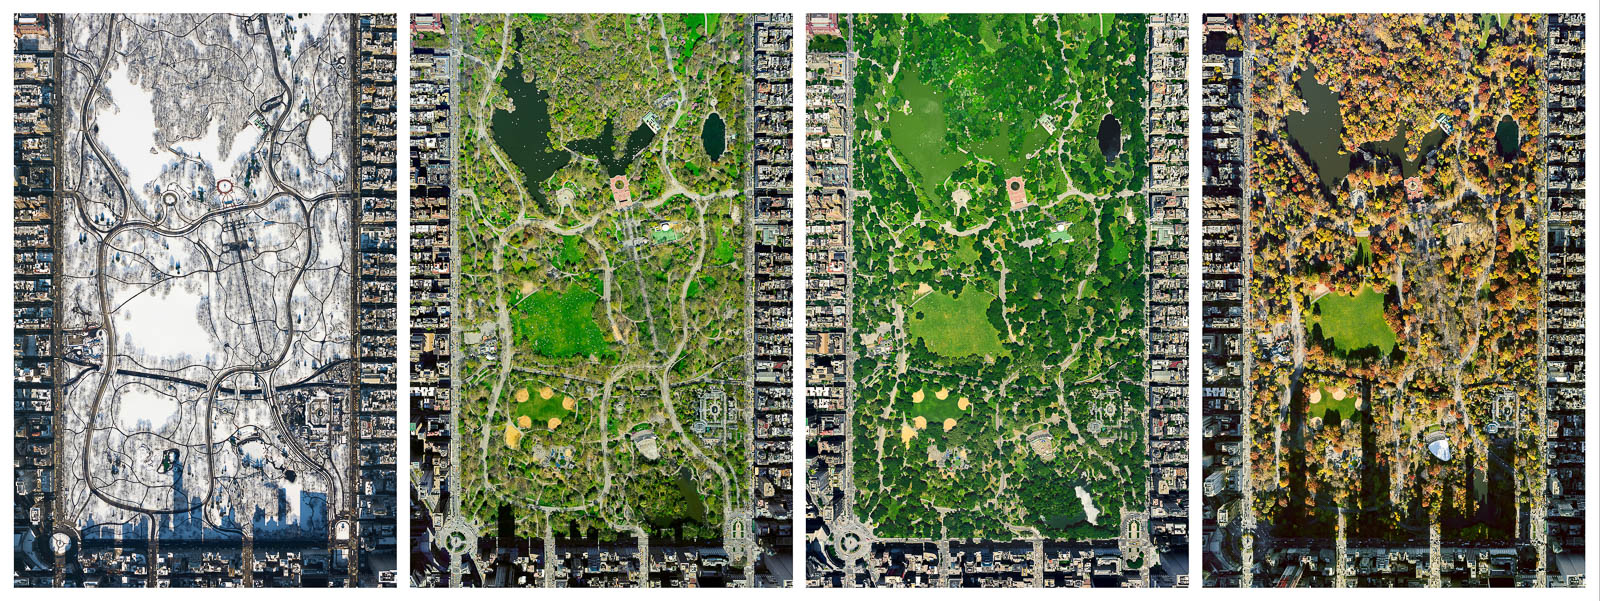 Central Park from 10,000 feet (Set)